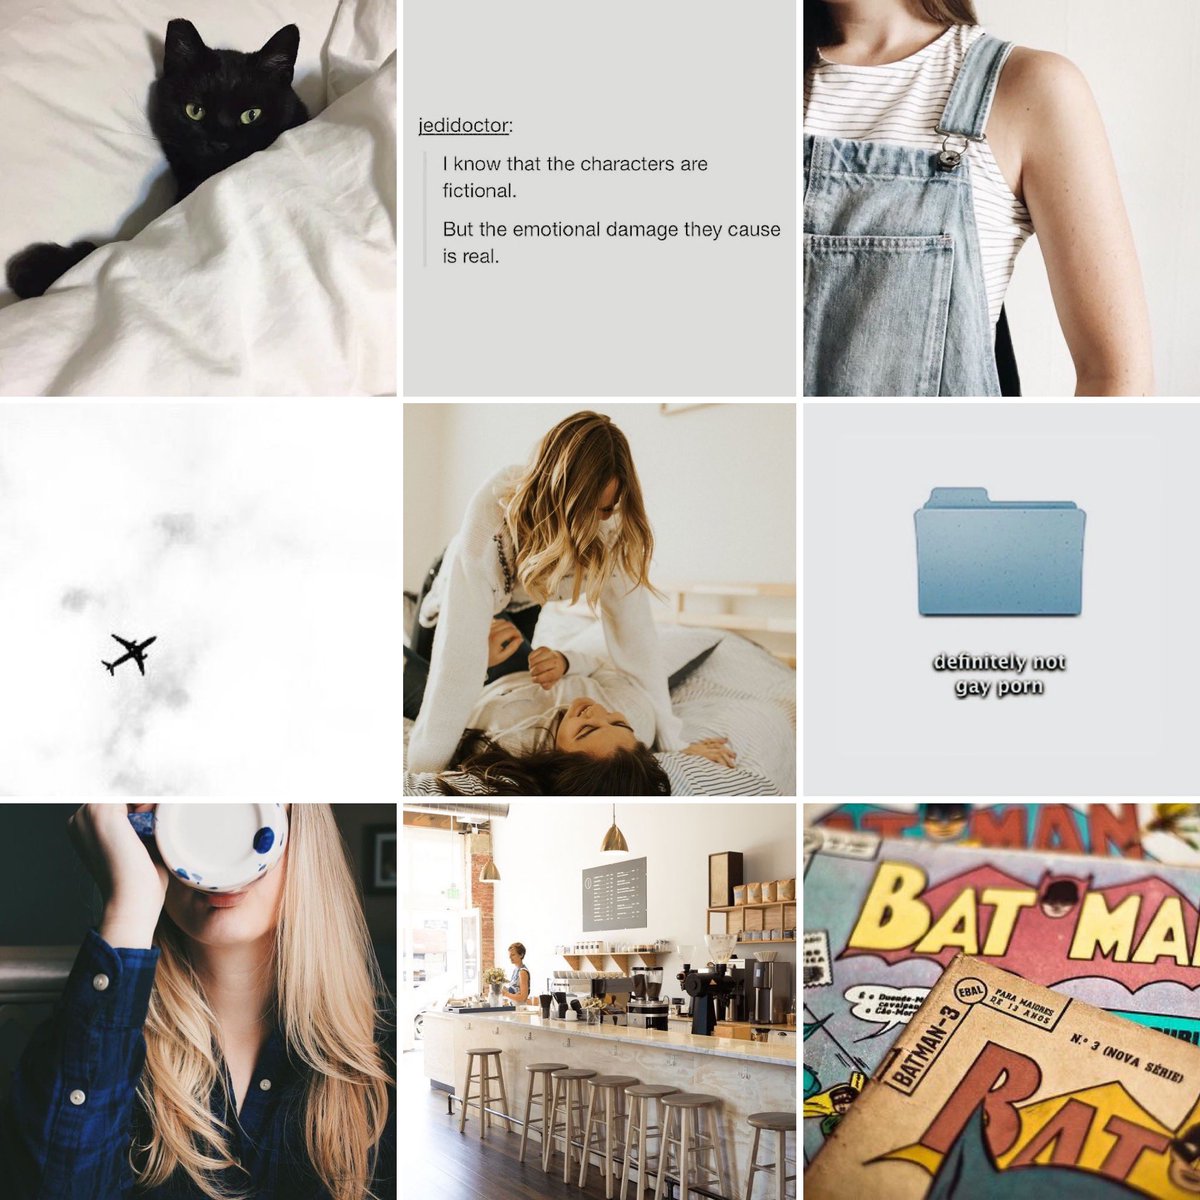 heroes of yesterday. cade is thrilled to find someone in real life that is as obsessed with HoY as she is, and finds herself falling easily for her favorite customer. not realizing that she’s actually cade’s fandom nemesis, who she frequently fights online